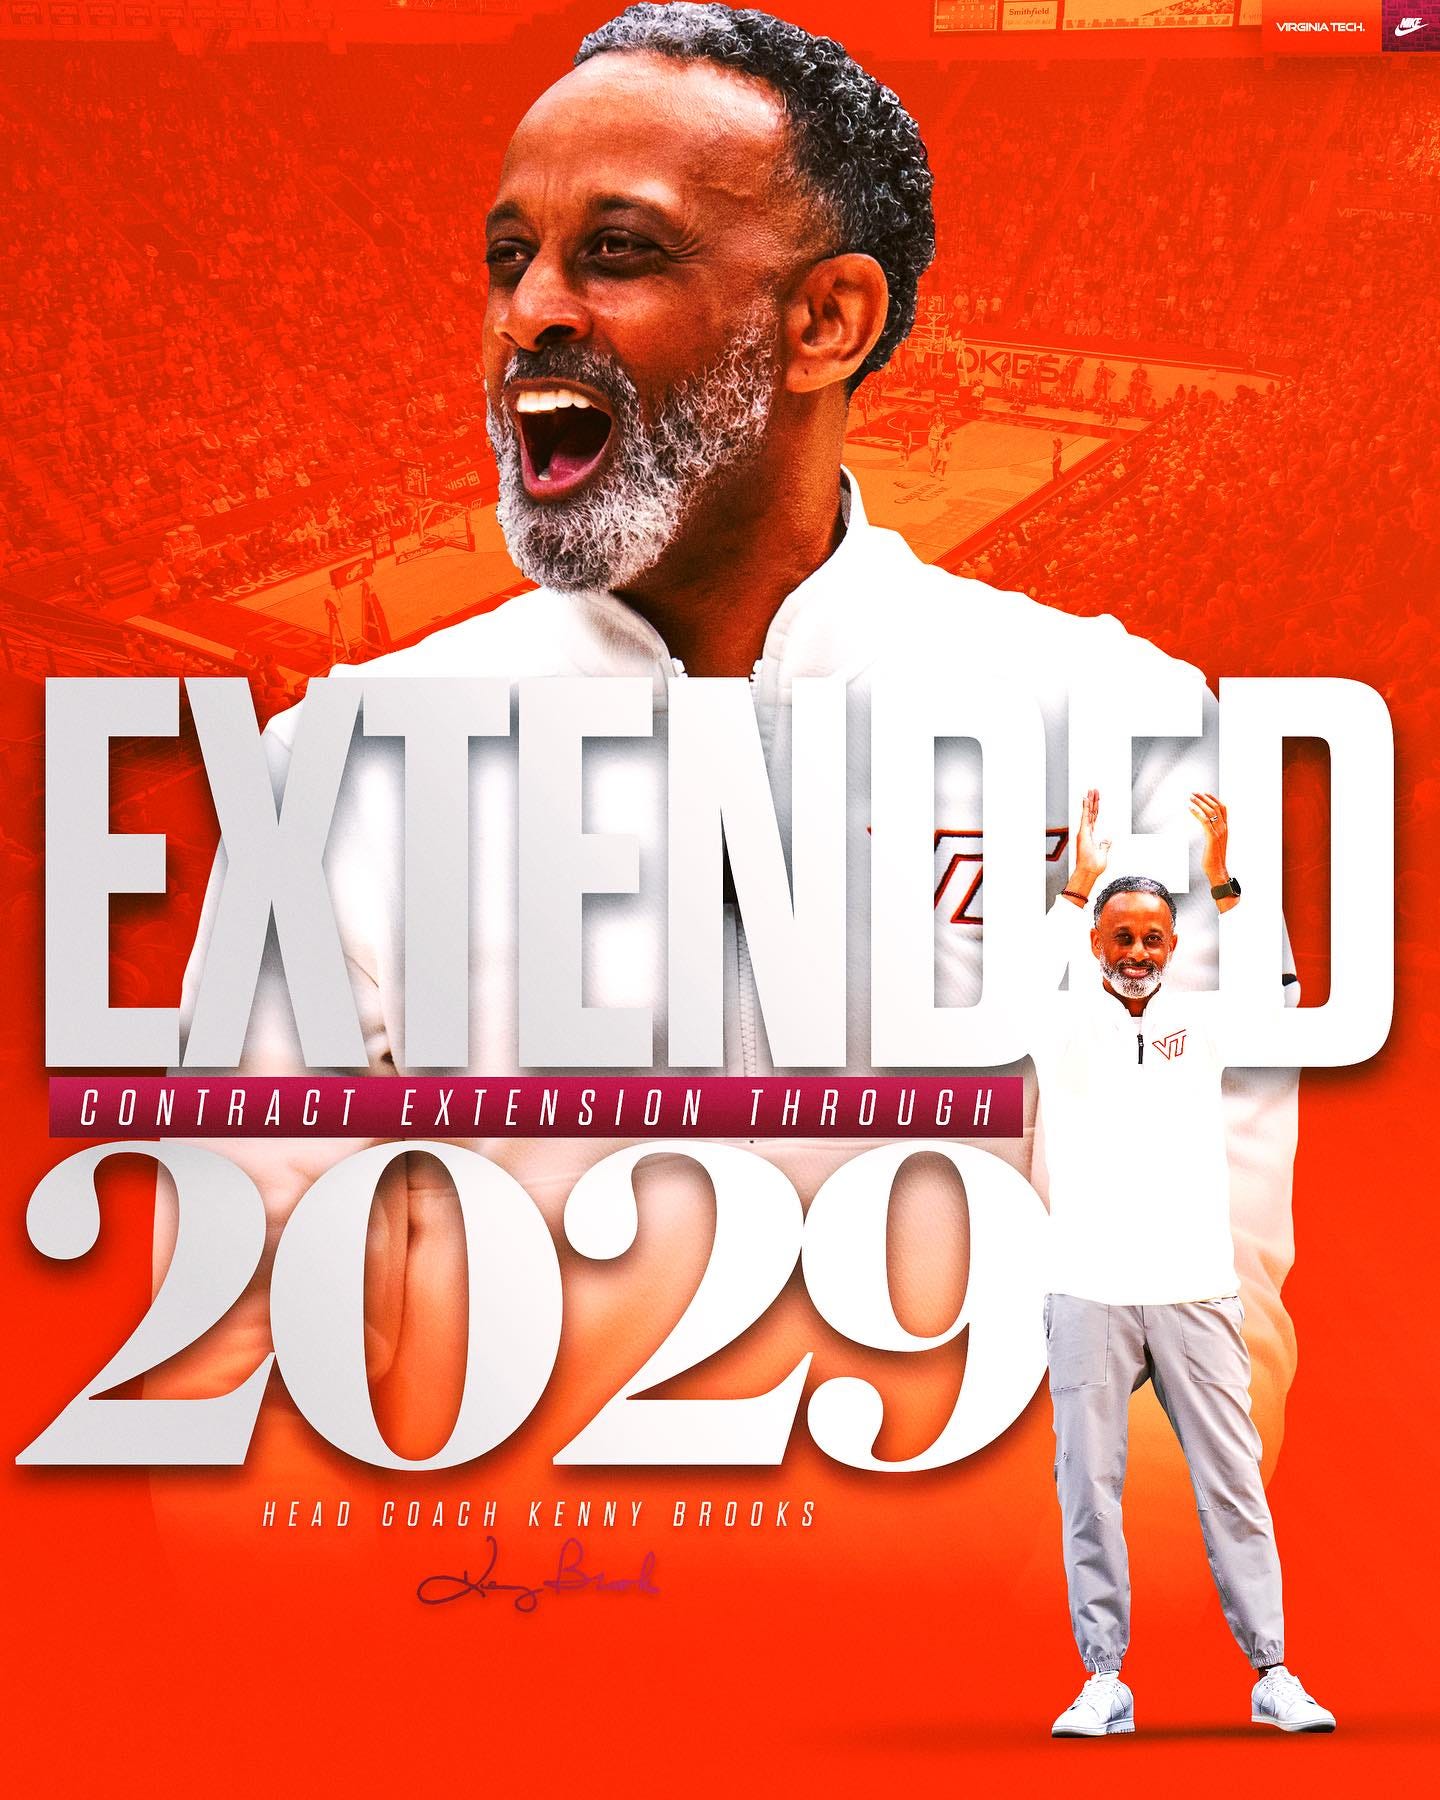 Virginia Tech Women's Basketball Coach Kenny Brooks Contract Extension Graphic.